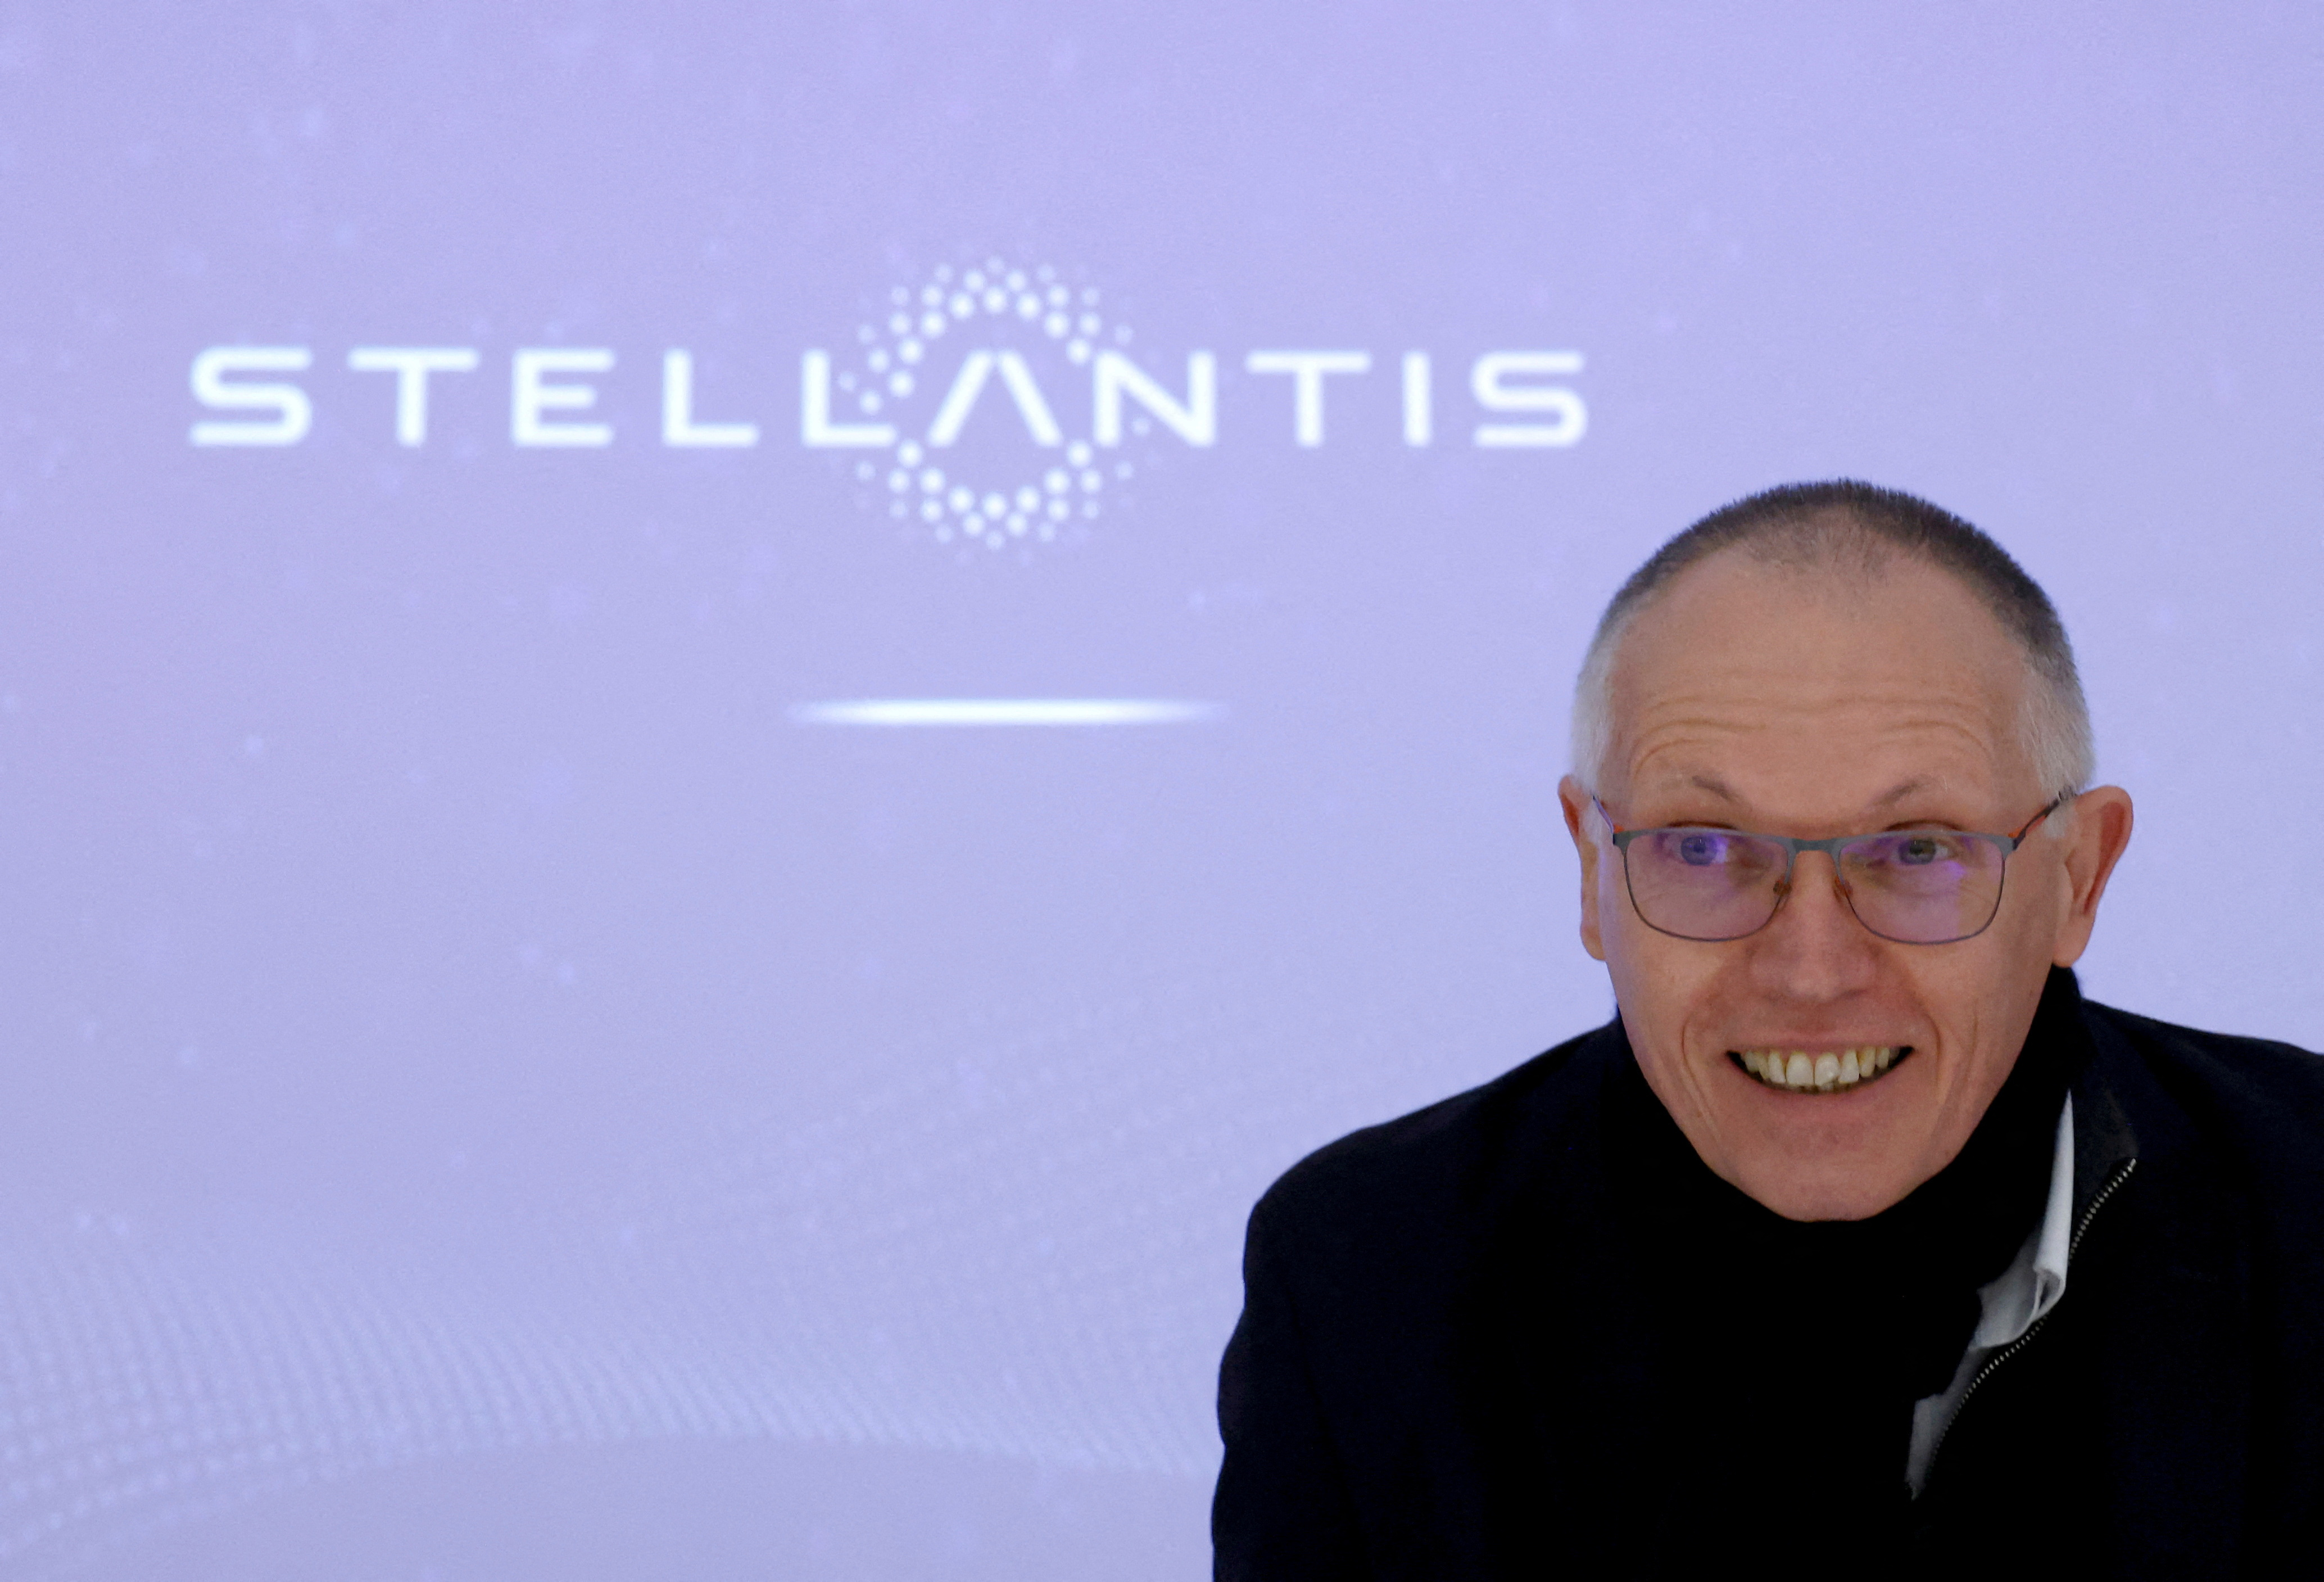 Stellantis CEO Carlos Tavares holds a press conference ahead of visiting the Sevel automaker's plant, in Atessa